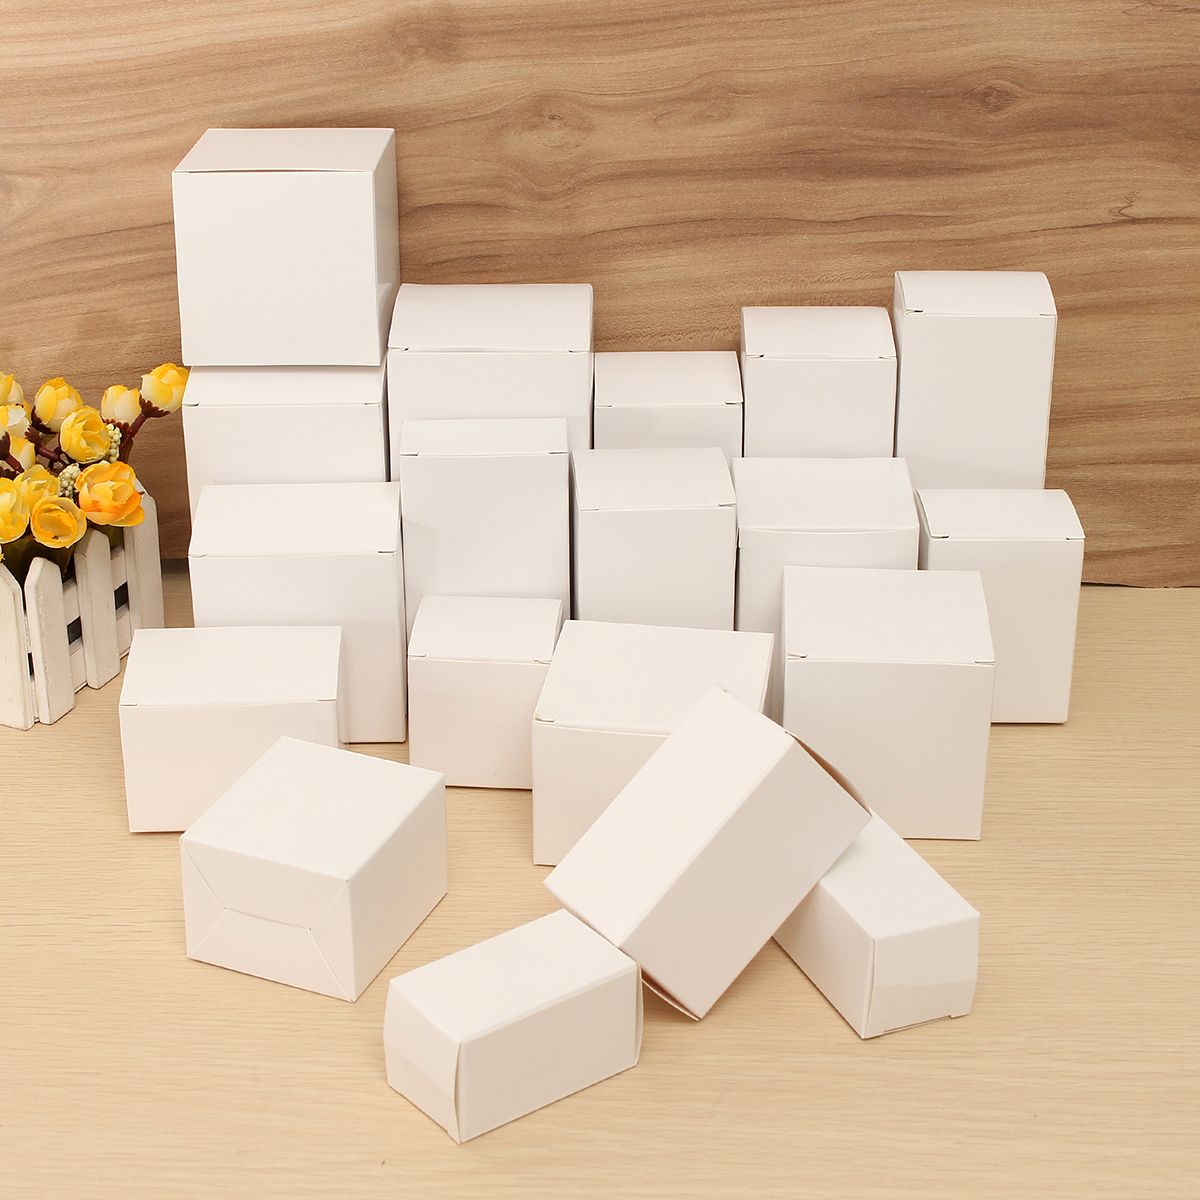 20-Different-Sizes-White-Cardboard-Postal-Box-Storage-Carton-for-Gifs-Crafting-Packaging-Mailing-1184848